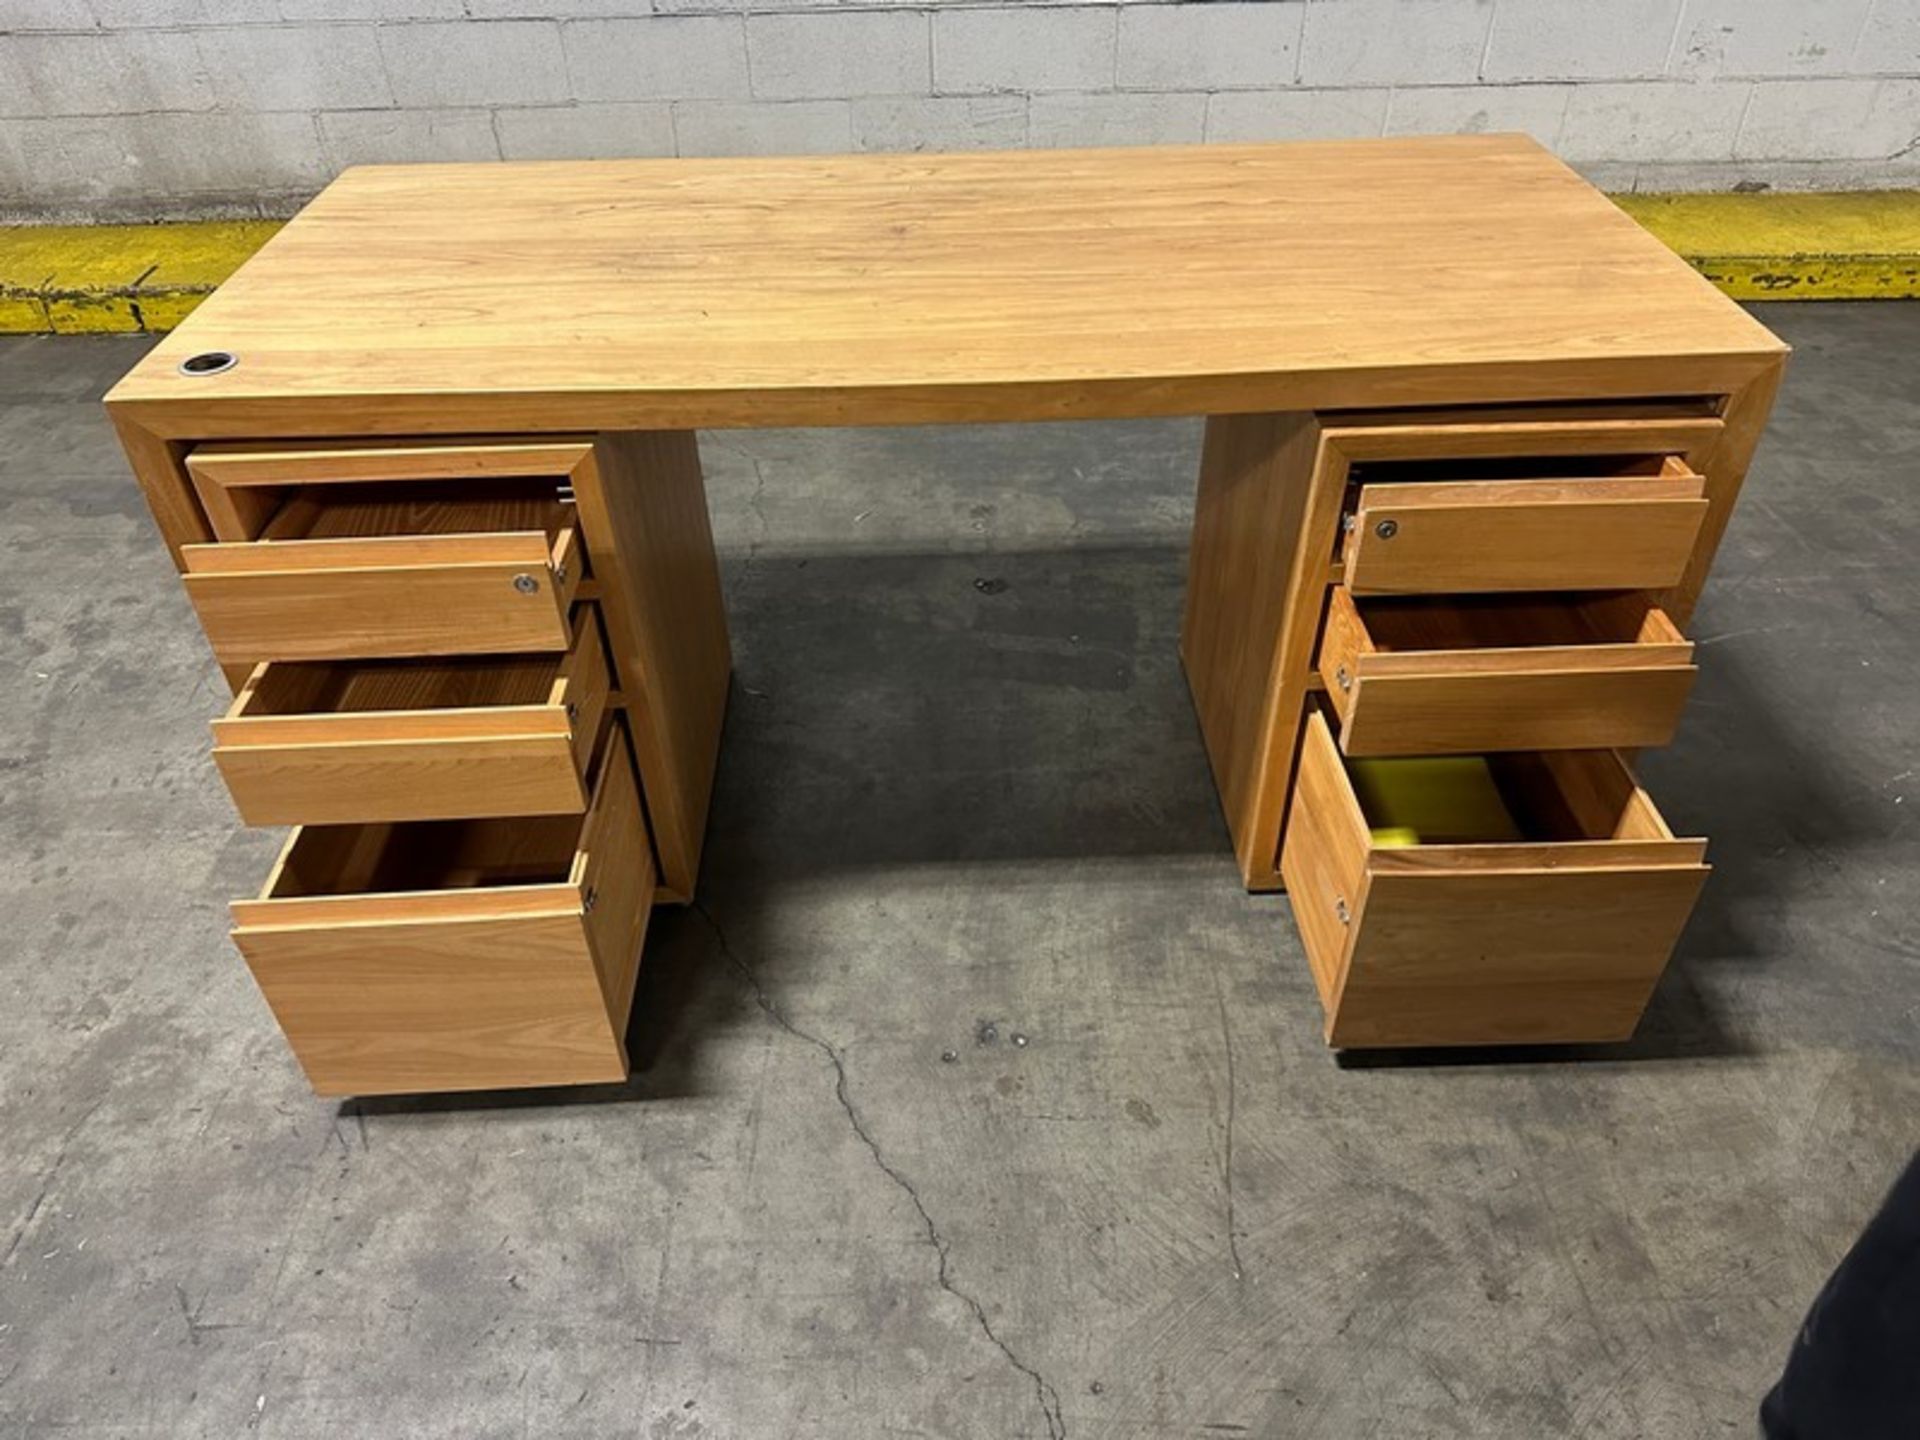 Desks: LOT (7pcs) 66" x 30" x 29"h (Located East Rutherford, NJ) (NOTE: REMOVAL 2-DAYS ONLY - Image 3 of 4